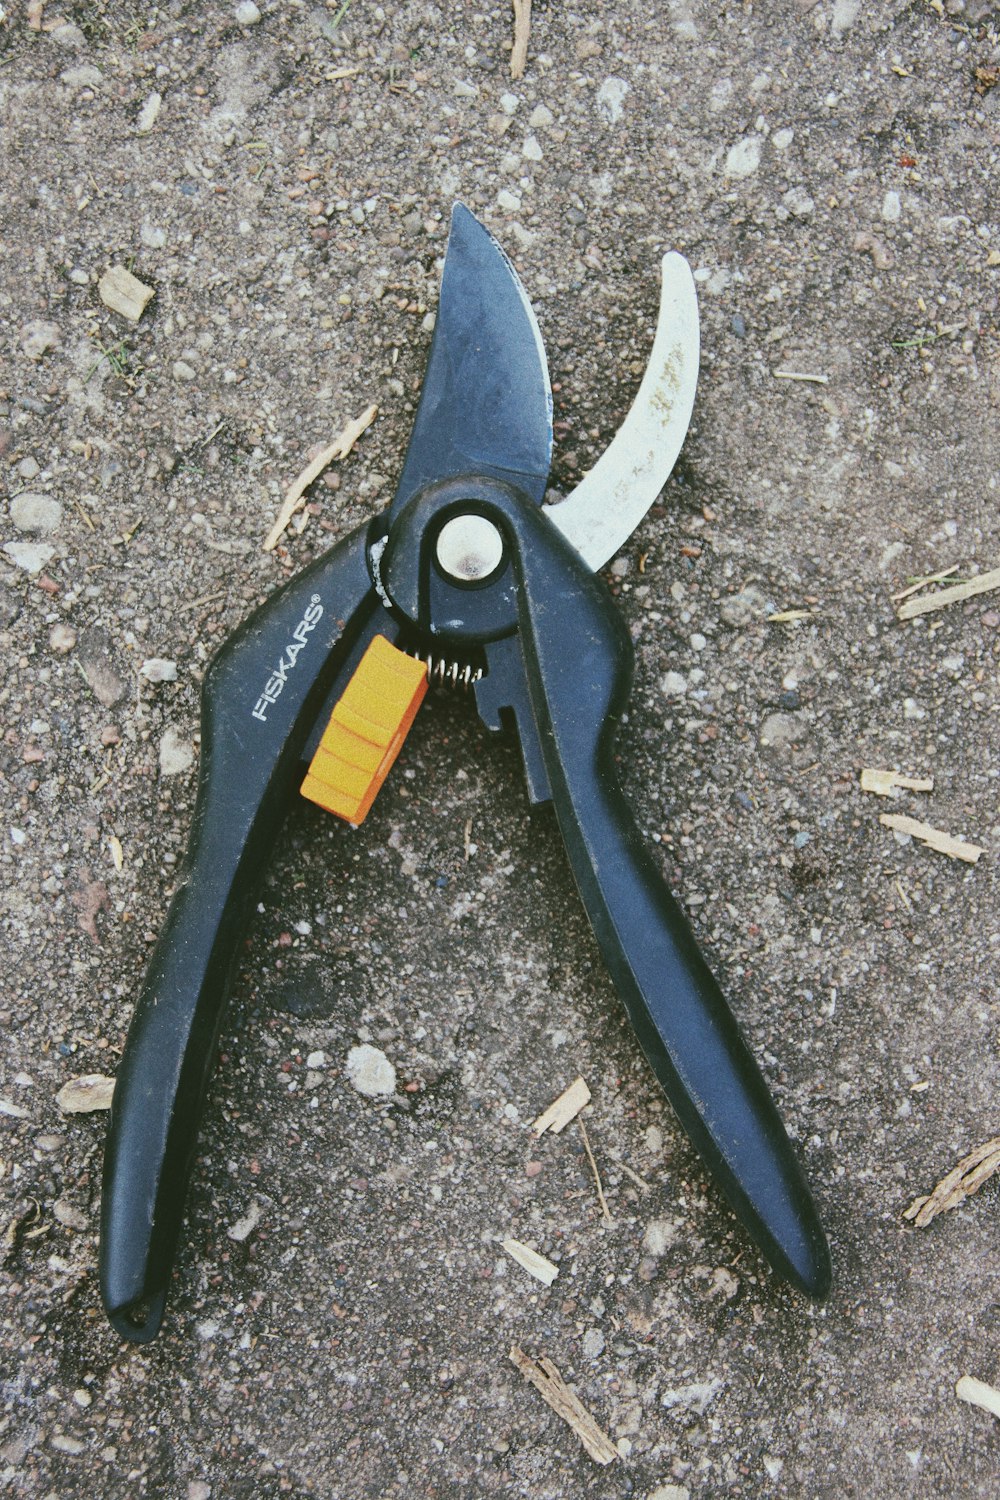 a pair of pliers is laying on the ground